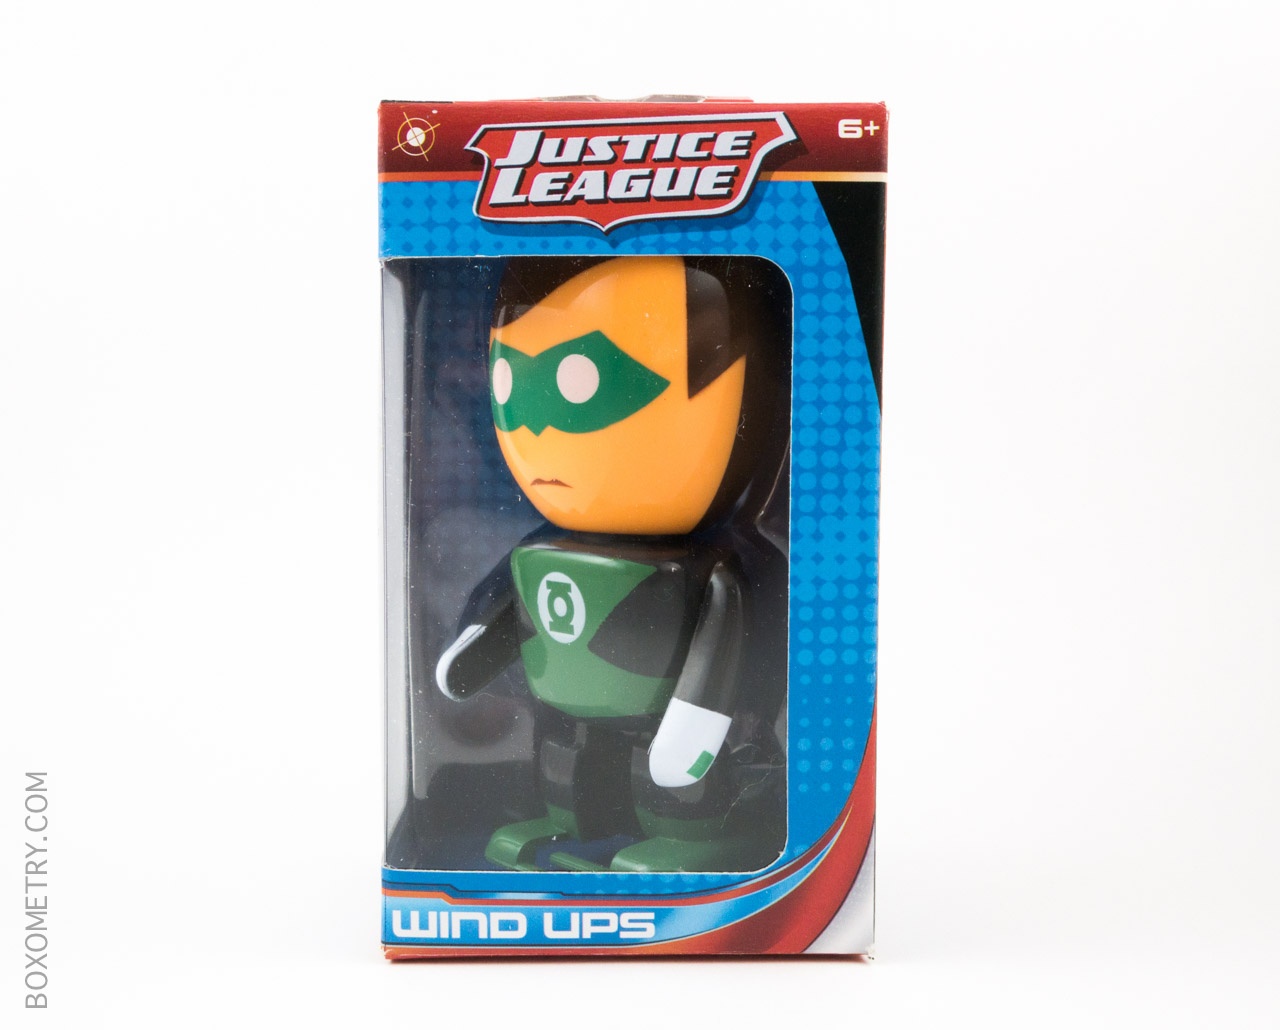 Boxometry 1Up Box July Review - Justice League Wind Ups